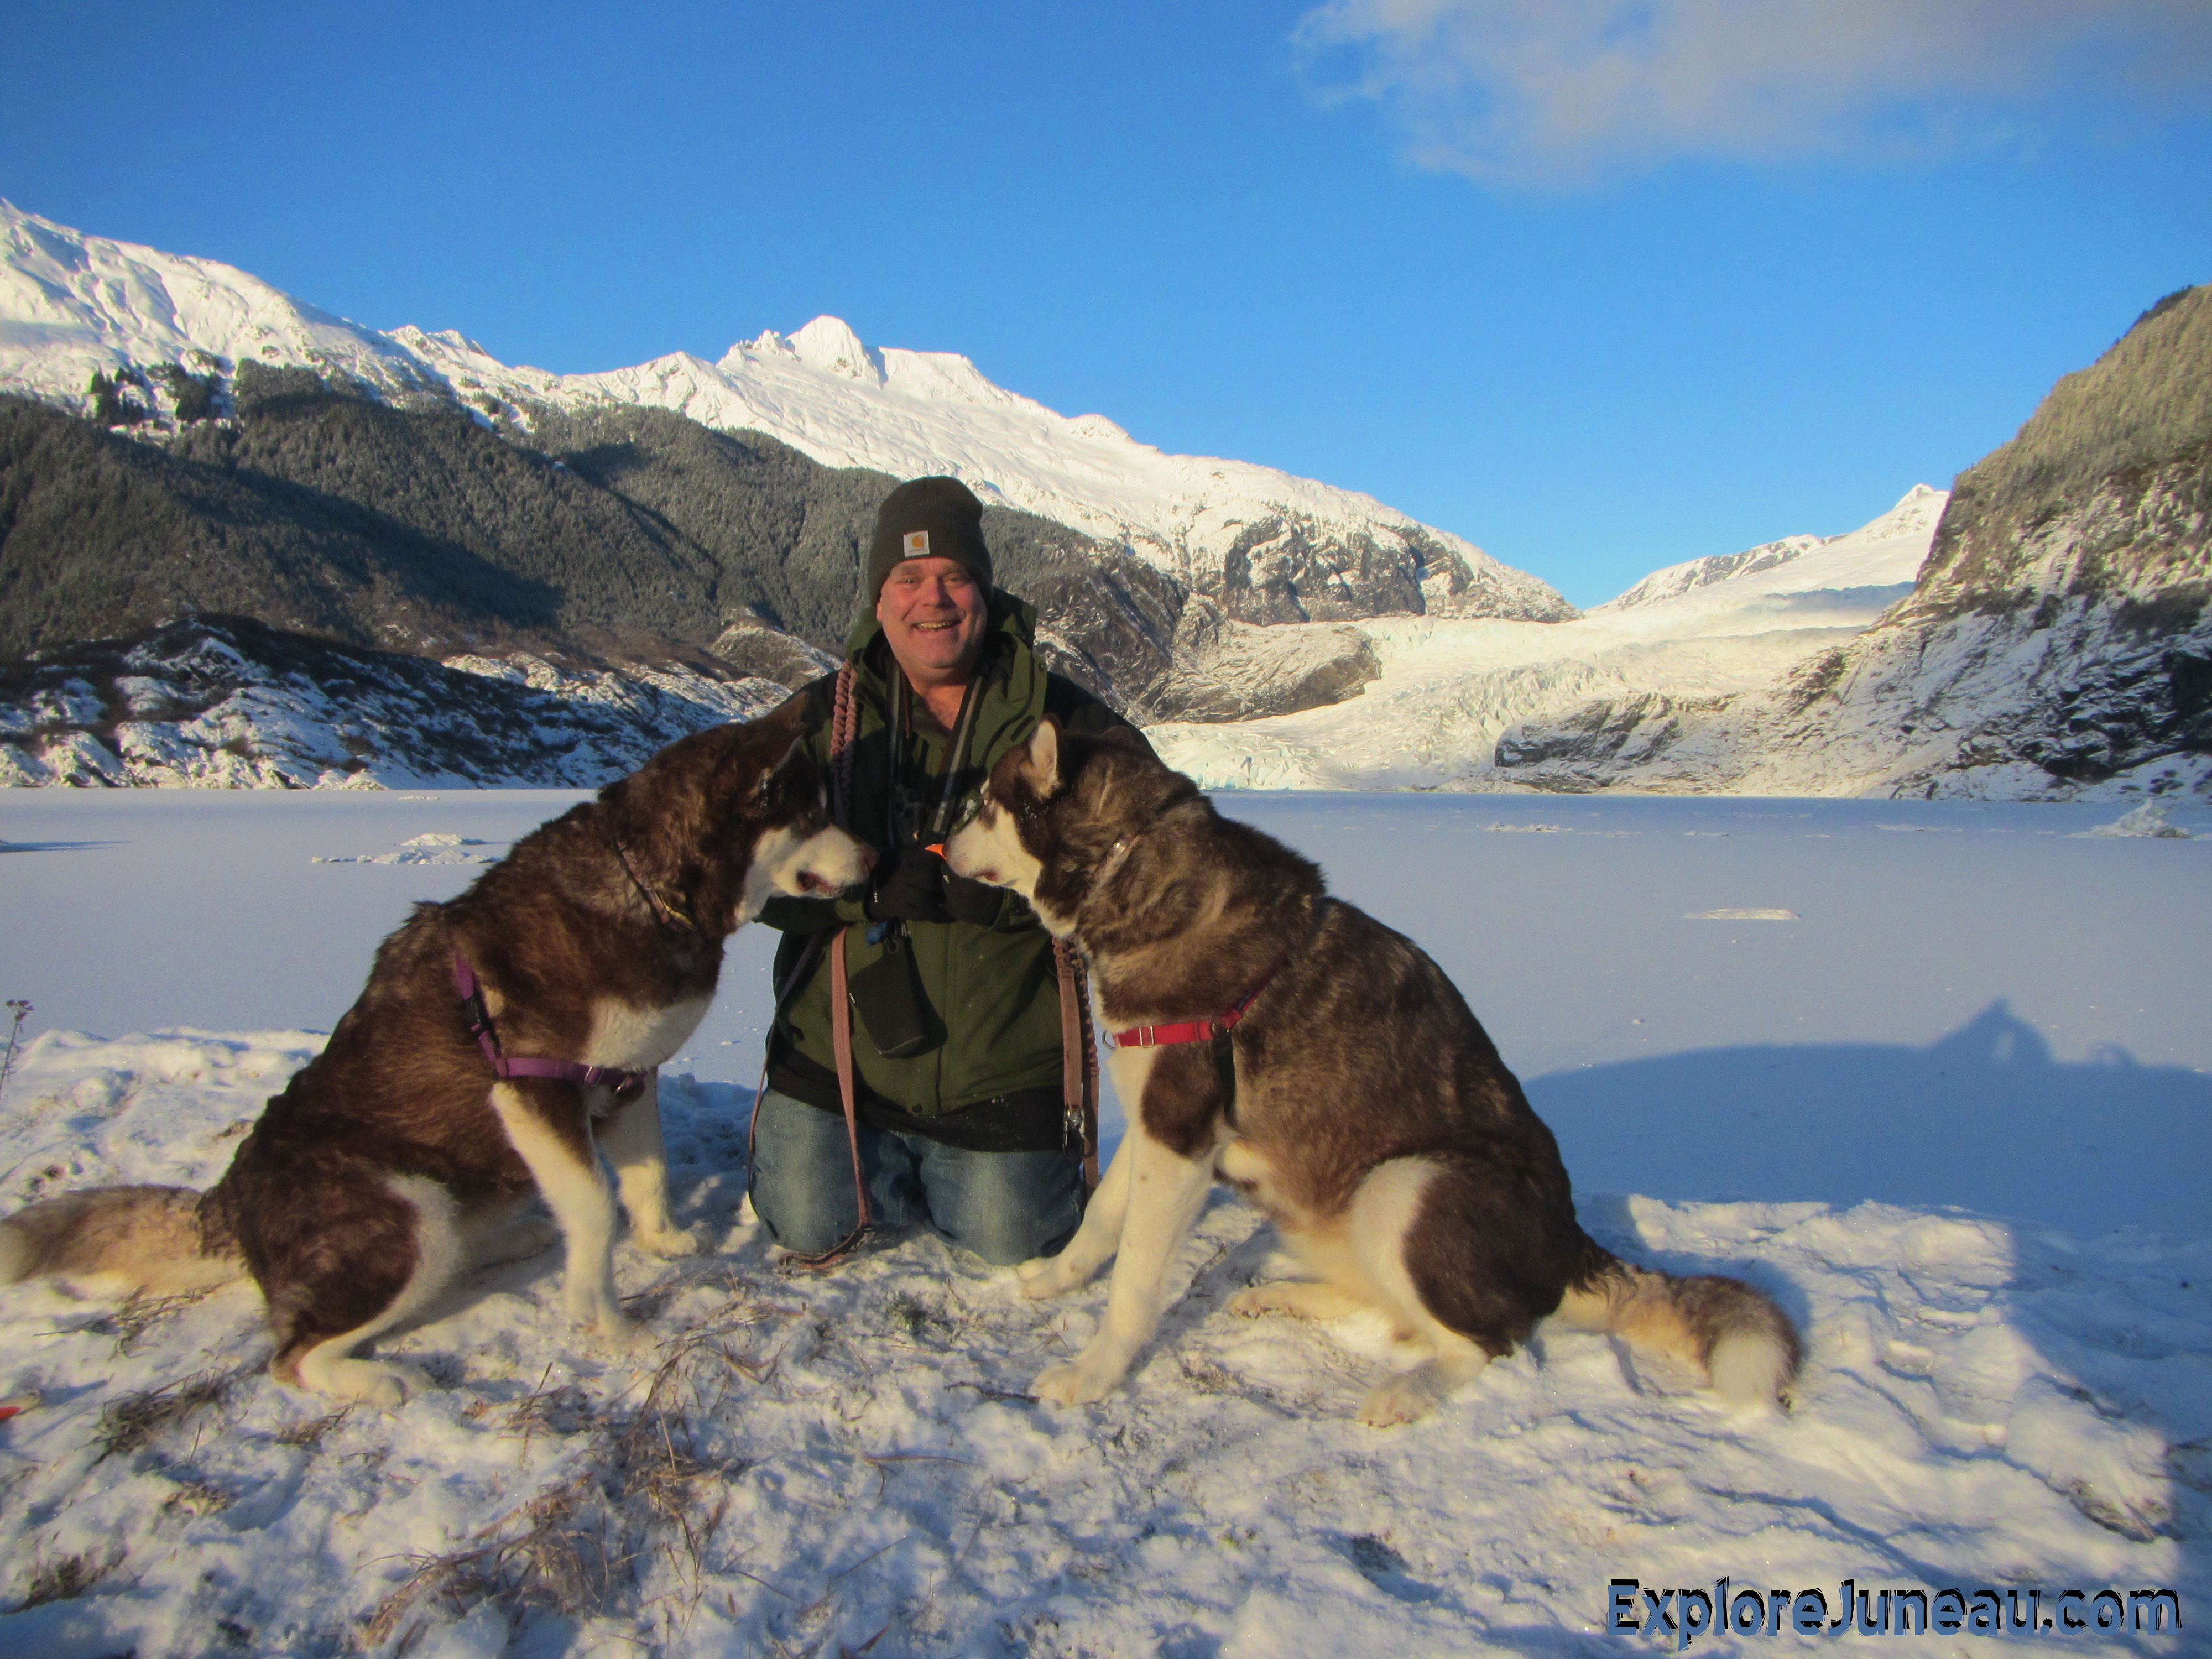 1 O'Clock Shadow! Skadi & Freya with Russell Josh Peterson in Juneau Alaska at Mendenhall Glacier - December 13, 2015. Thank you for your Kindness and Support!